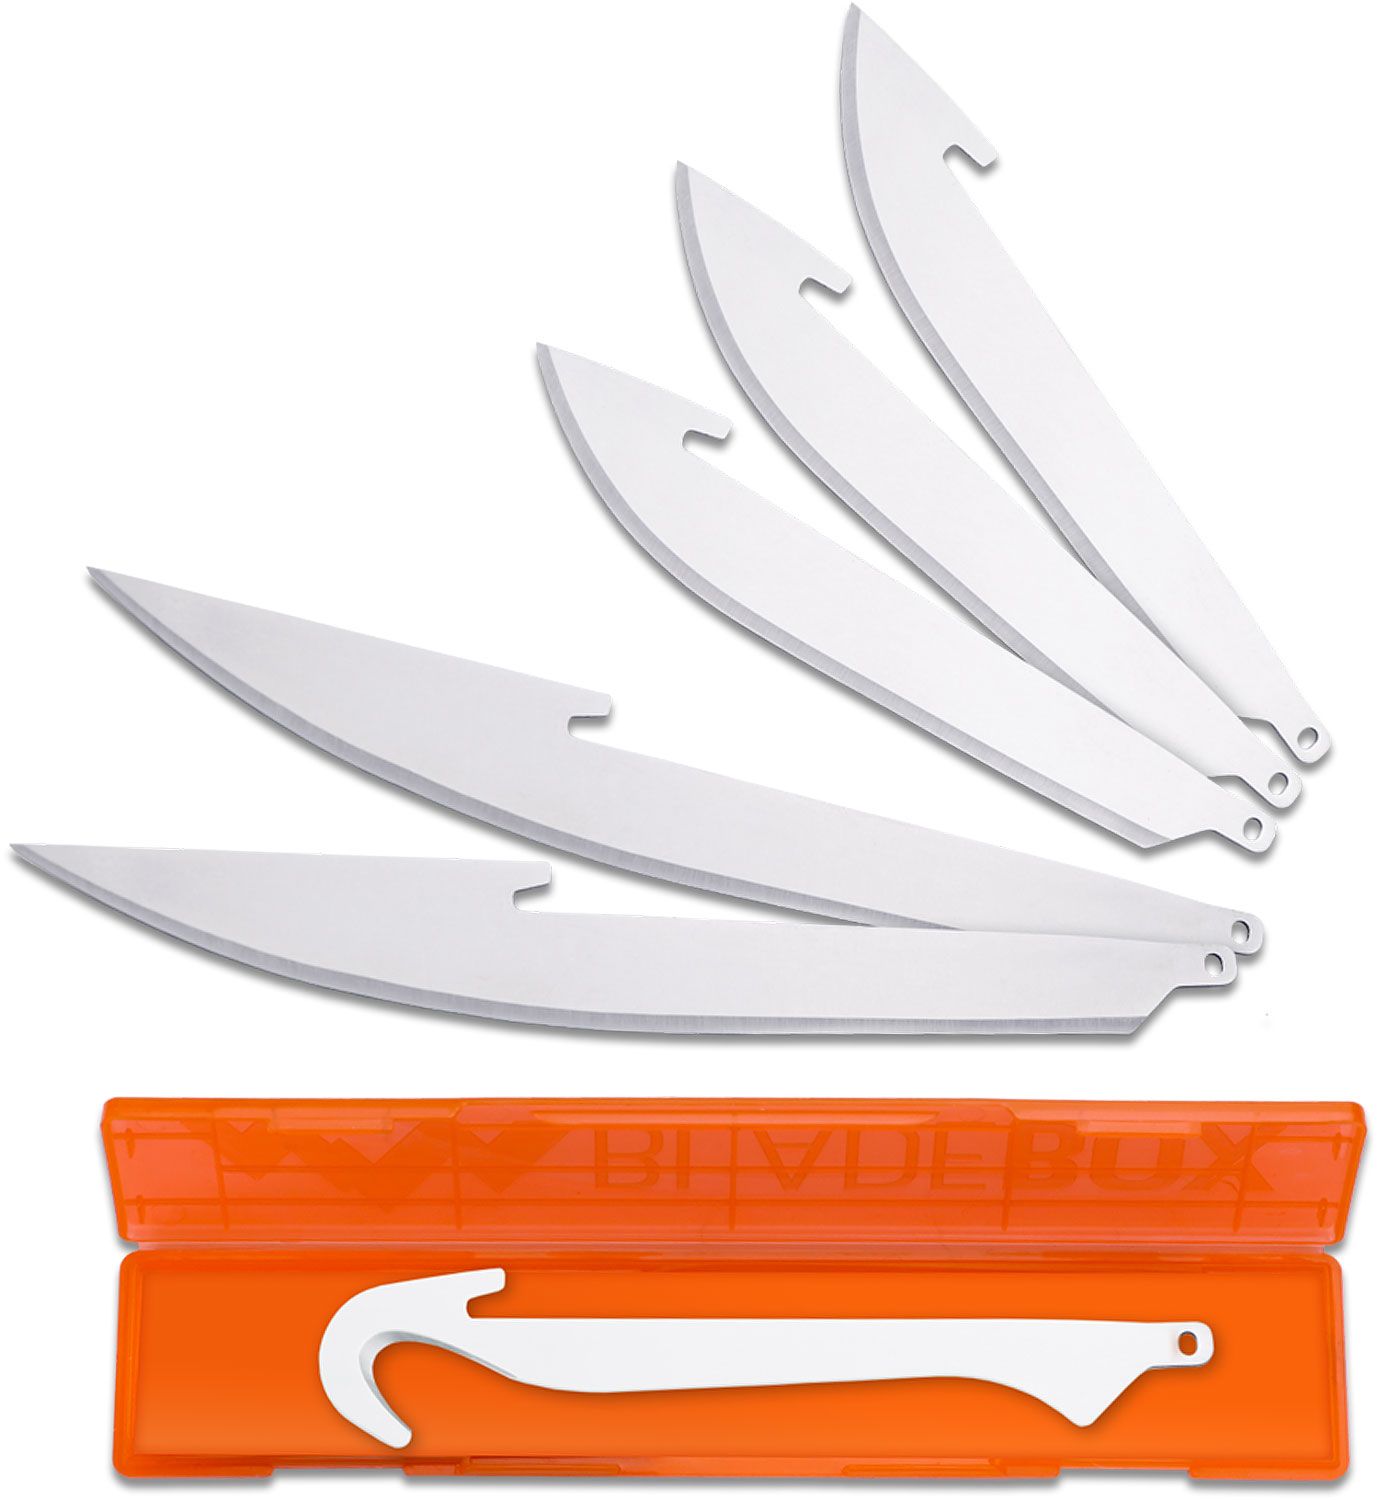 Outdoor Edge RazorSafe™ System Combo Blades 6 Pack - Red Hill Cutlery